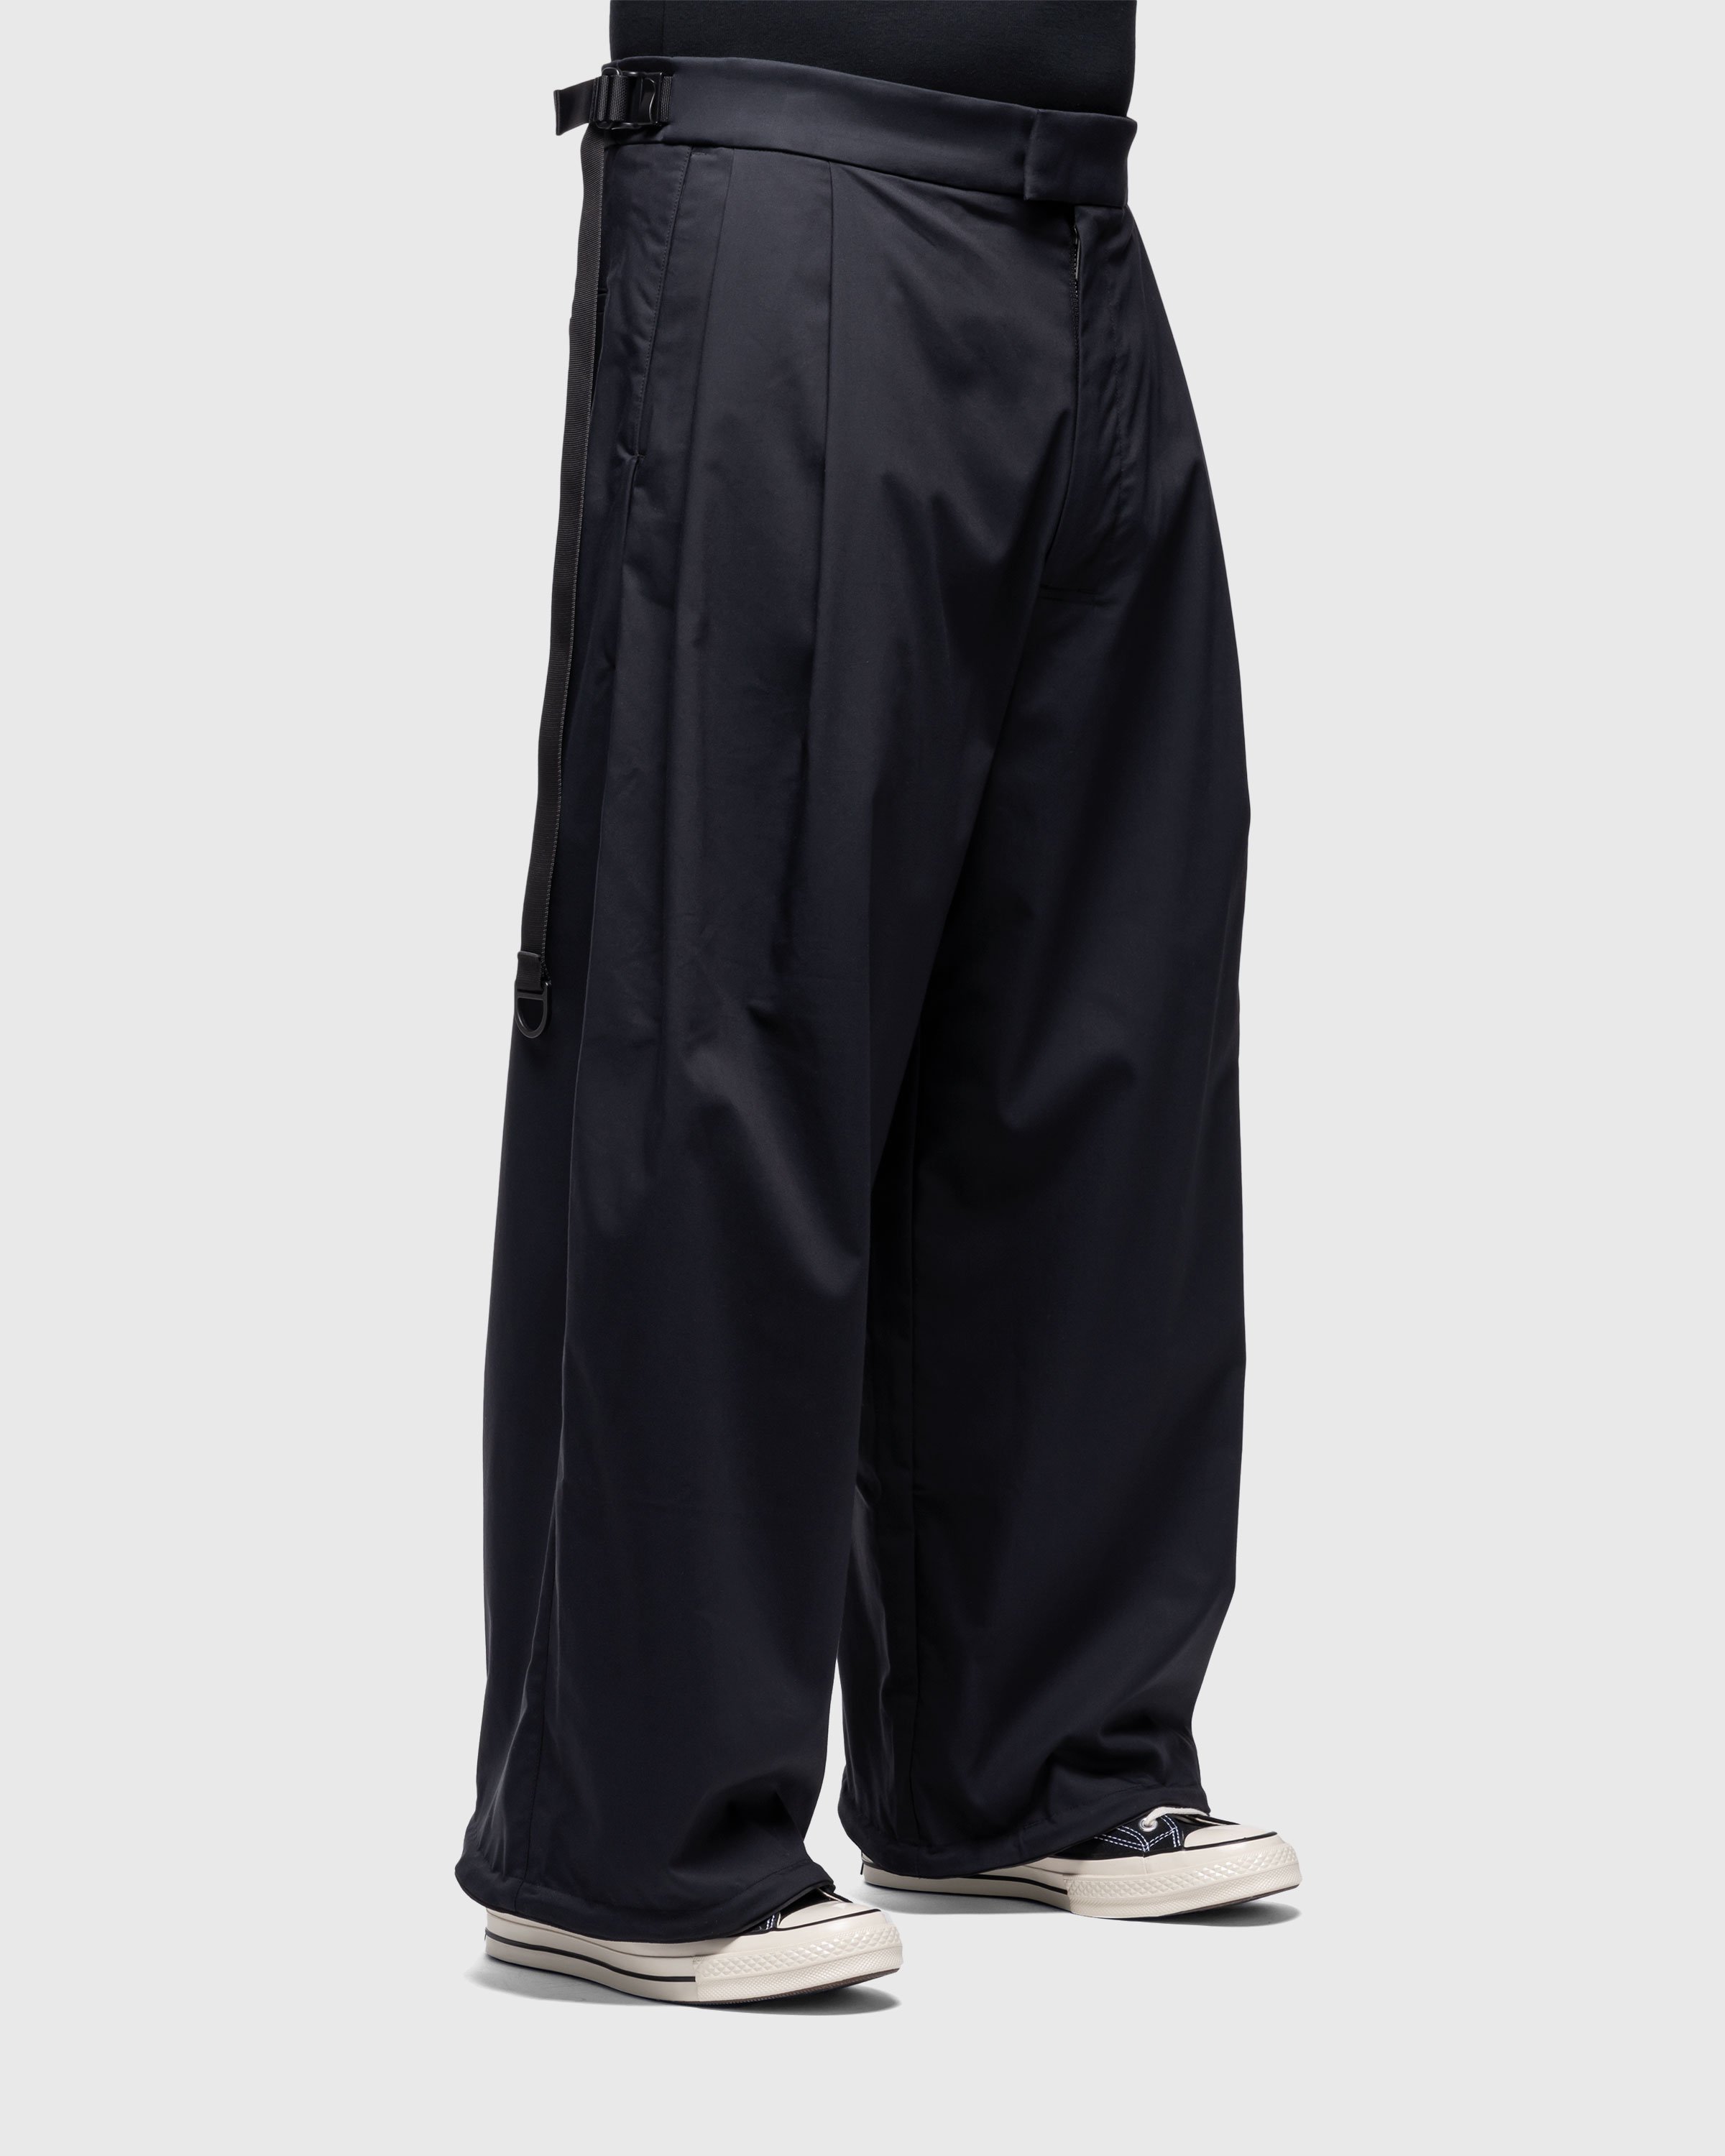 ACRONYM - P48-CH Micro Twill Pleated Trouser Black - Clothing - Black - Image 4